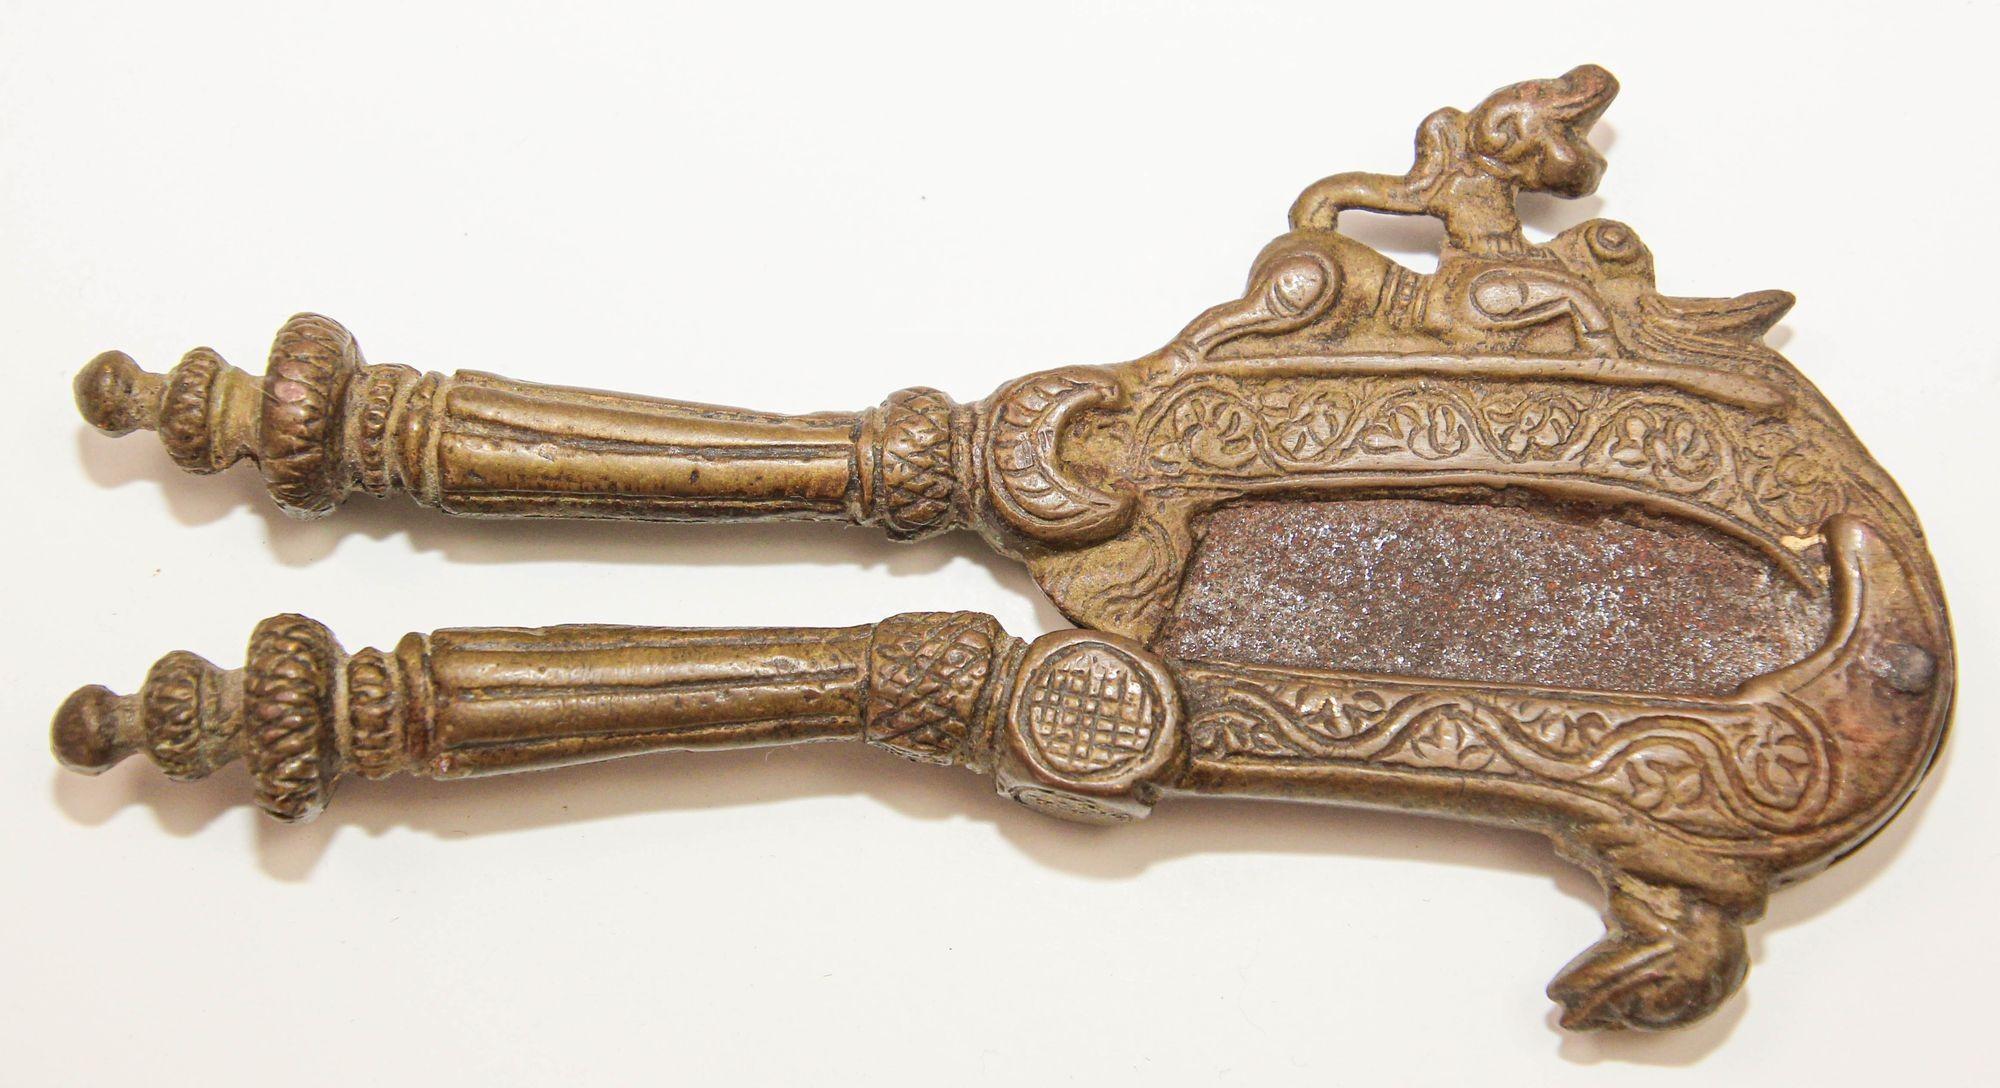 Antique Brass Betel Nut Cutter from India Collectible Asian Artifact
This excellent piece of art from India, made in solid brass, nut slicer or nut cracker which is two halves made with cast detailed design, It is connected with a copper rivet this